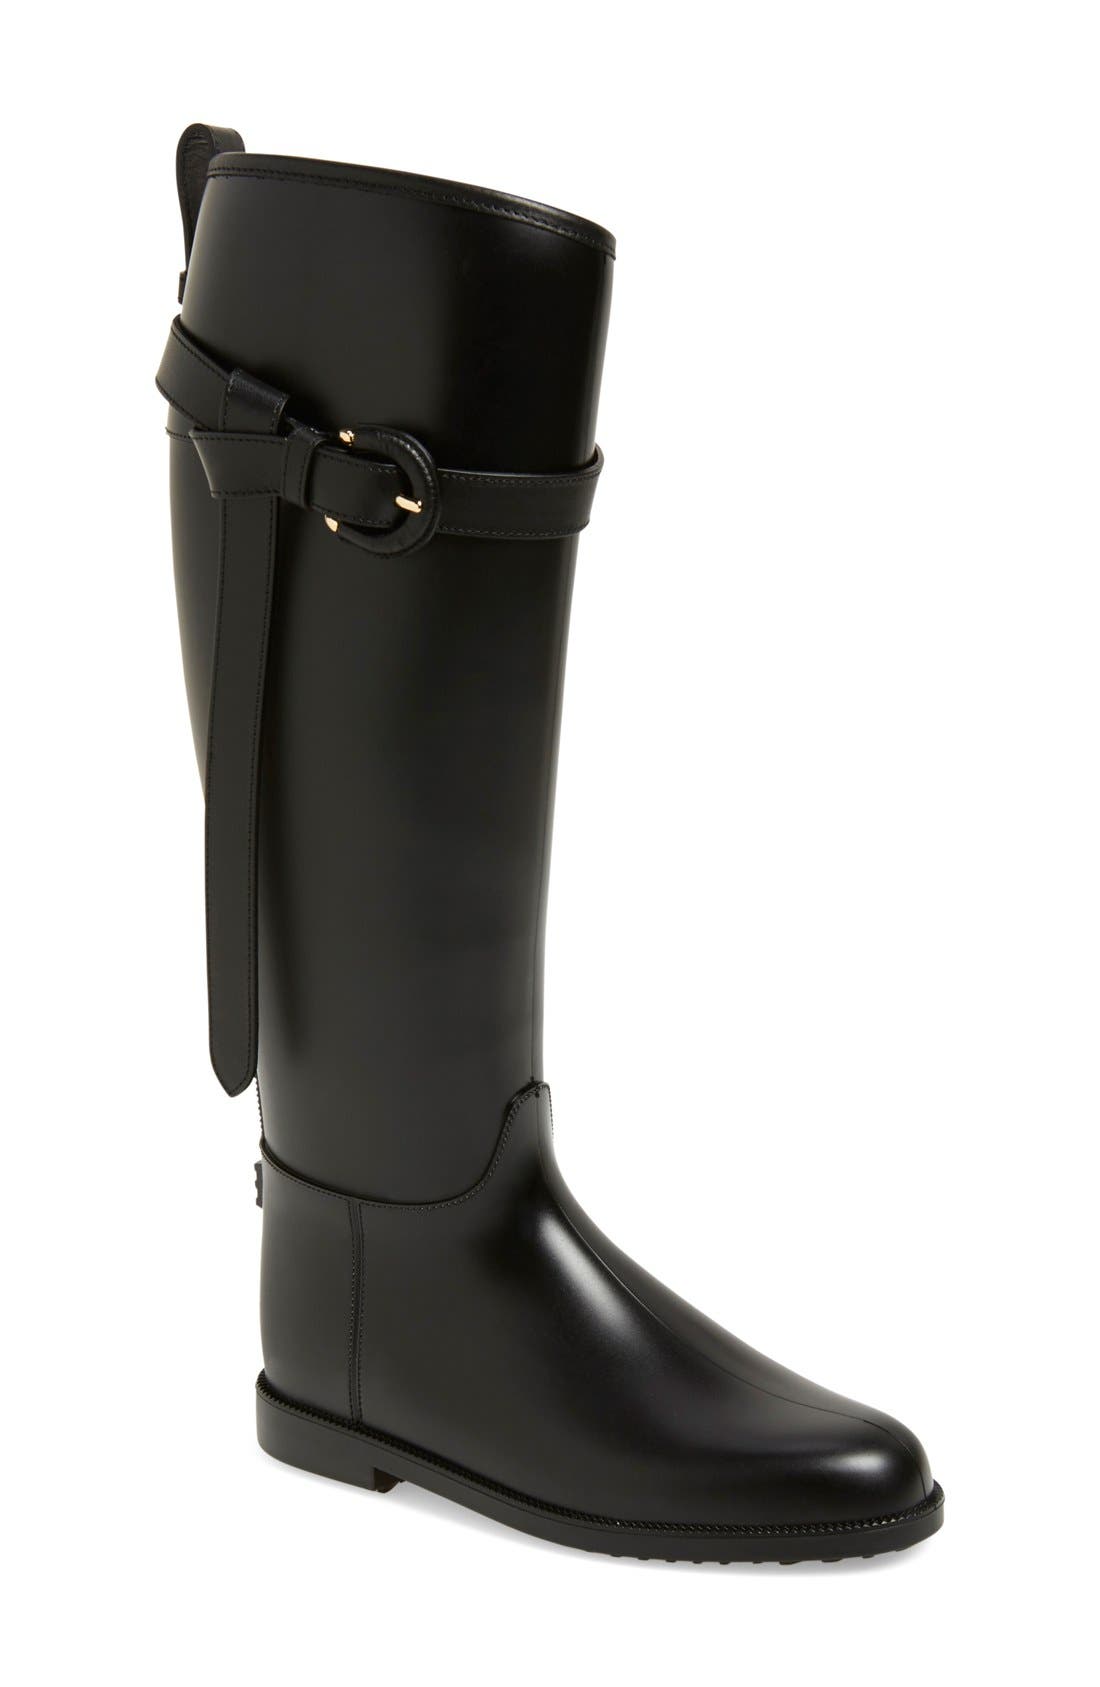 burberry equestrian boots